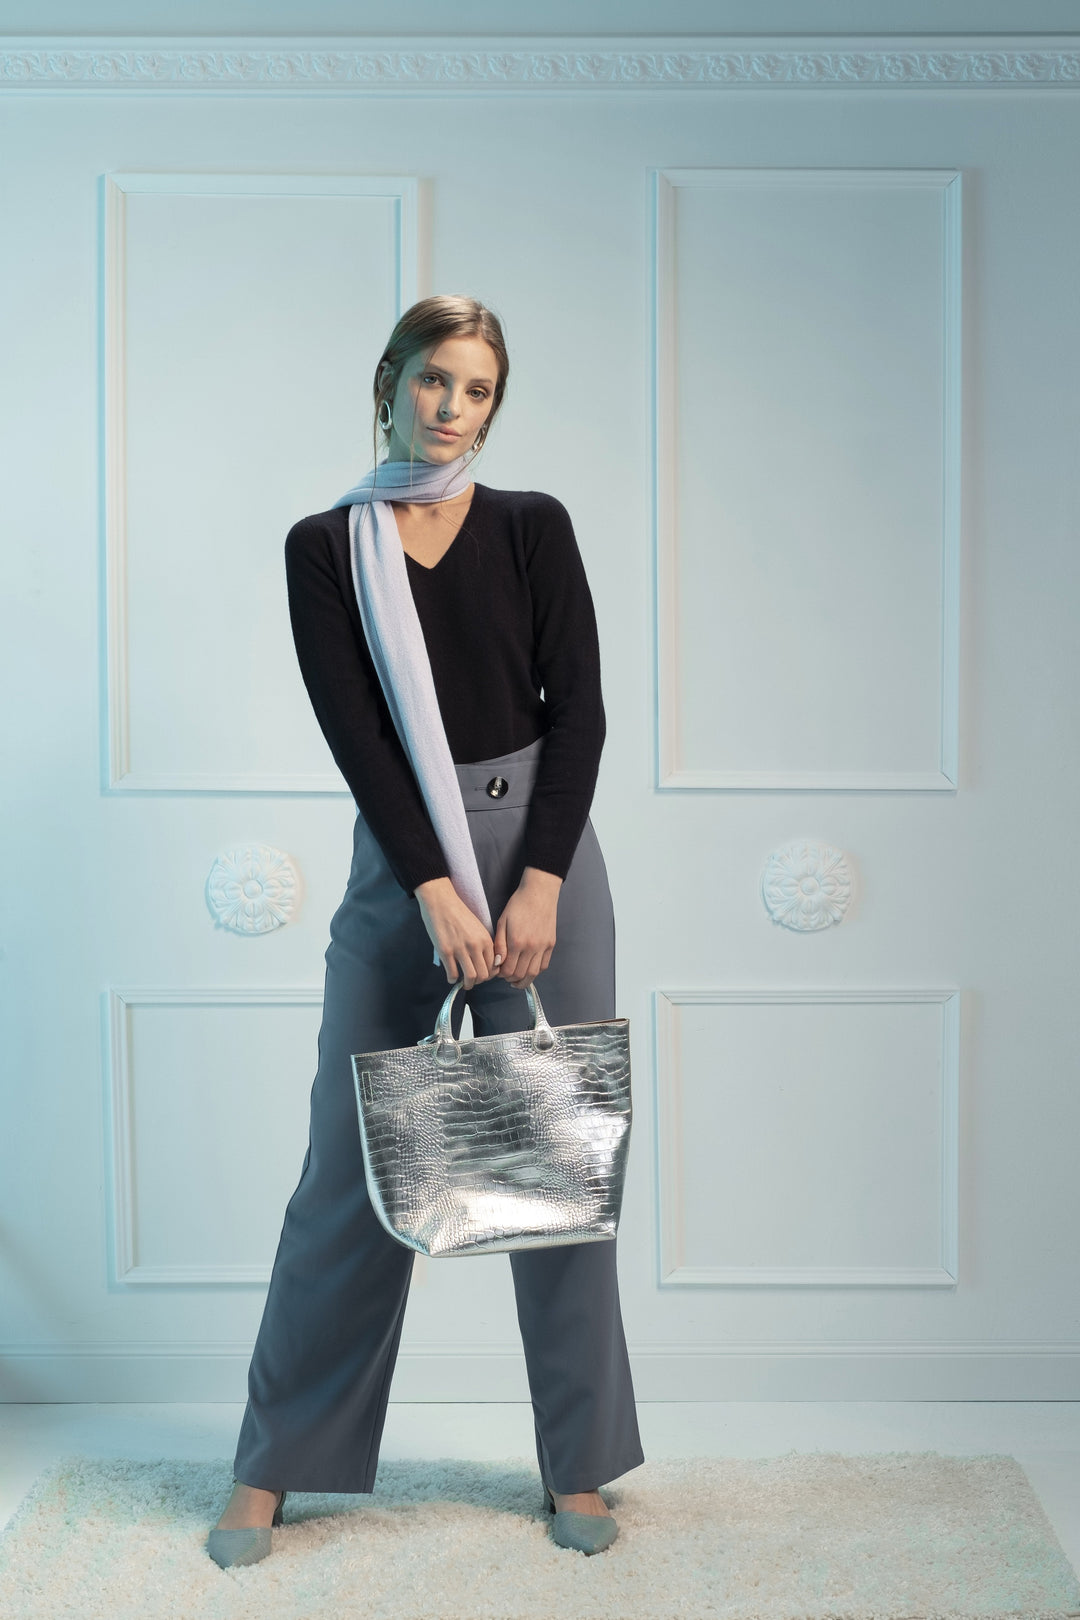 Woman in chic outfit holding silver handbag against decorative white wall